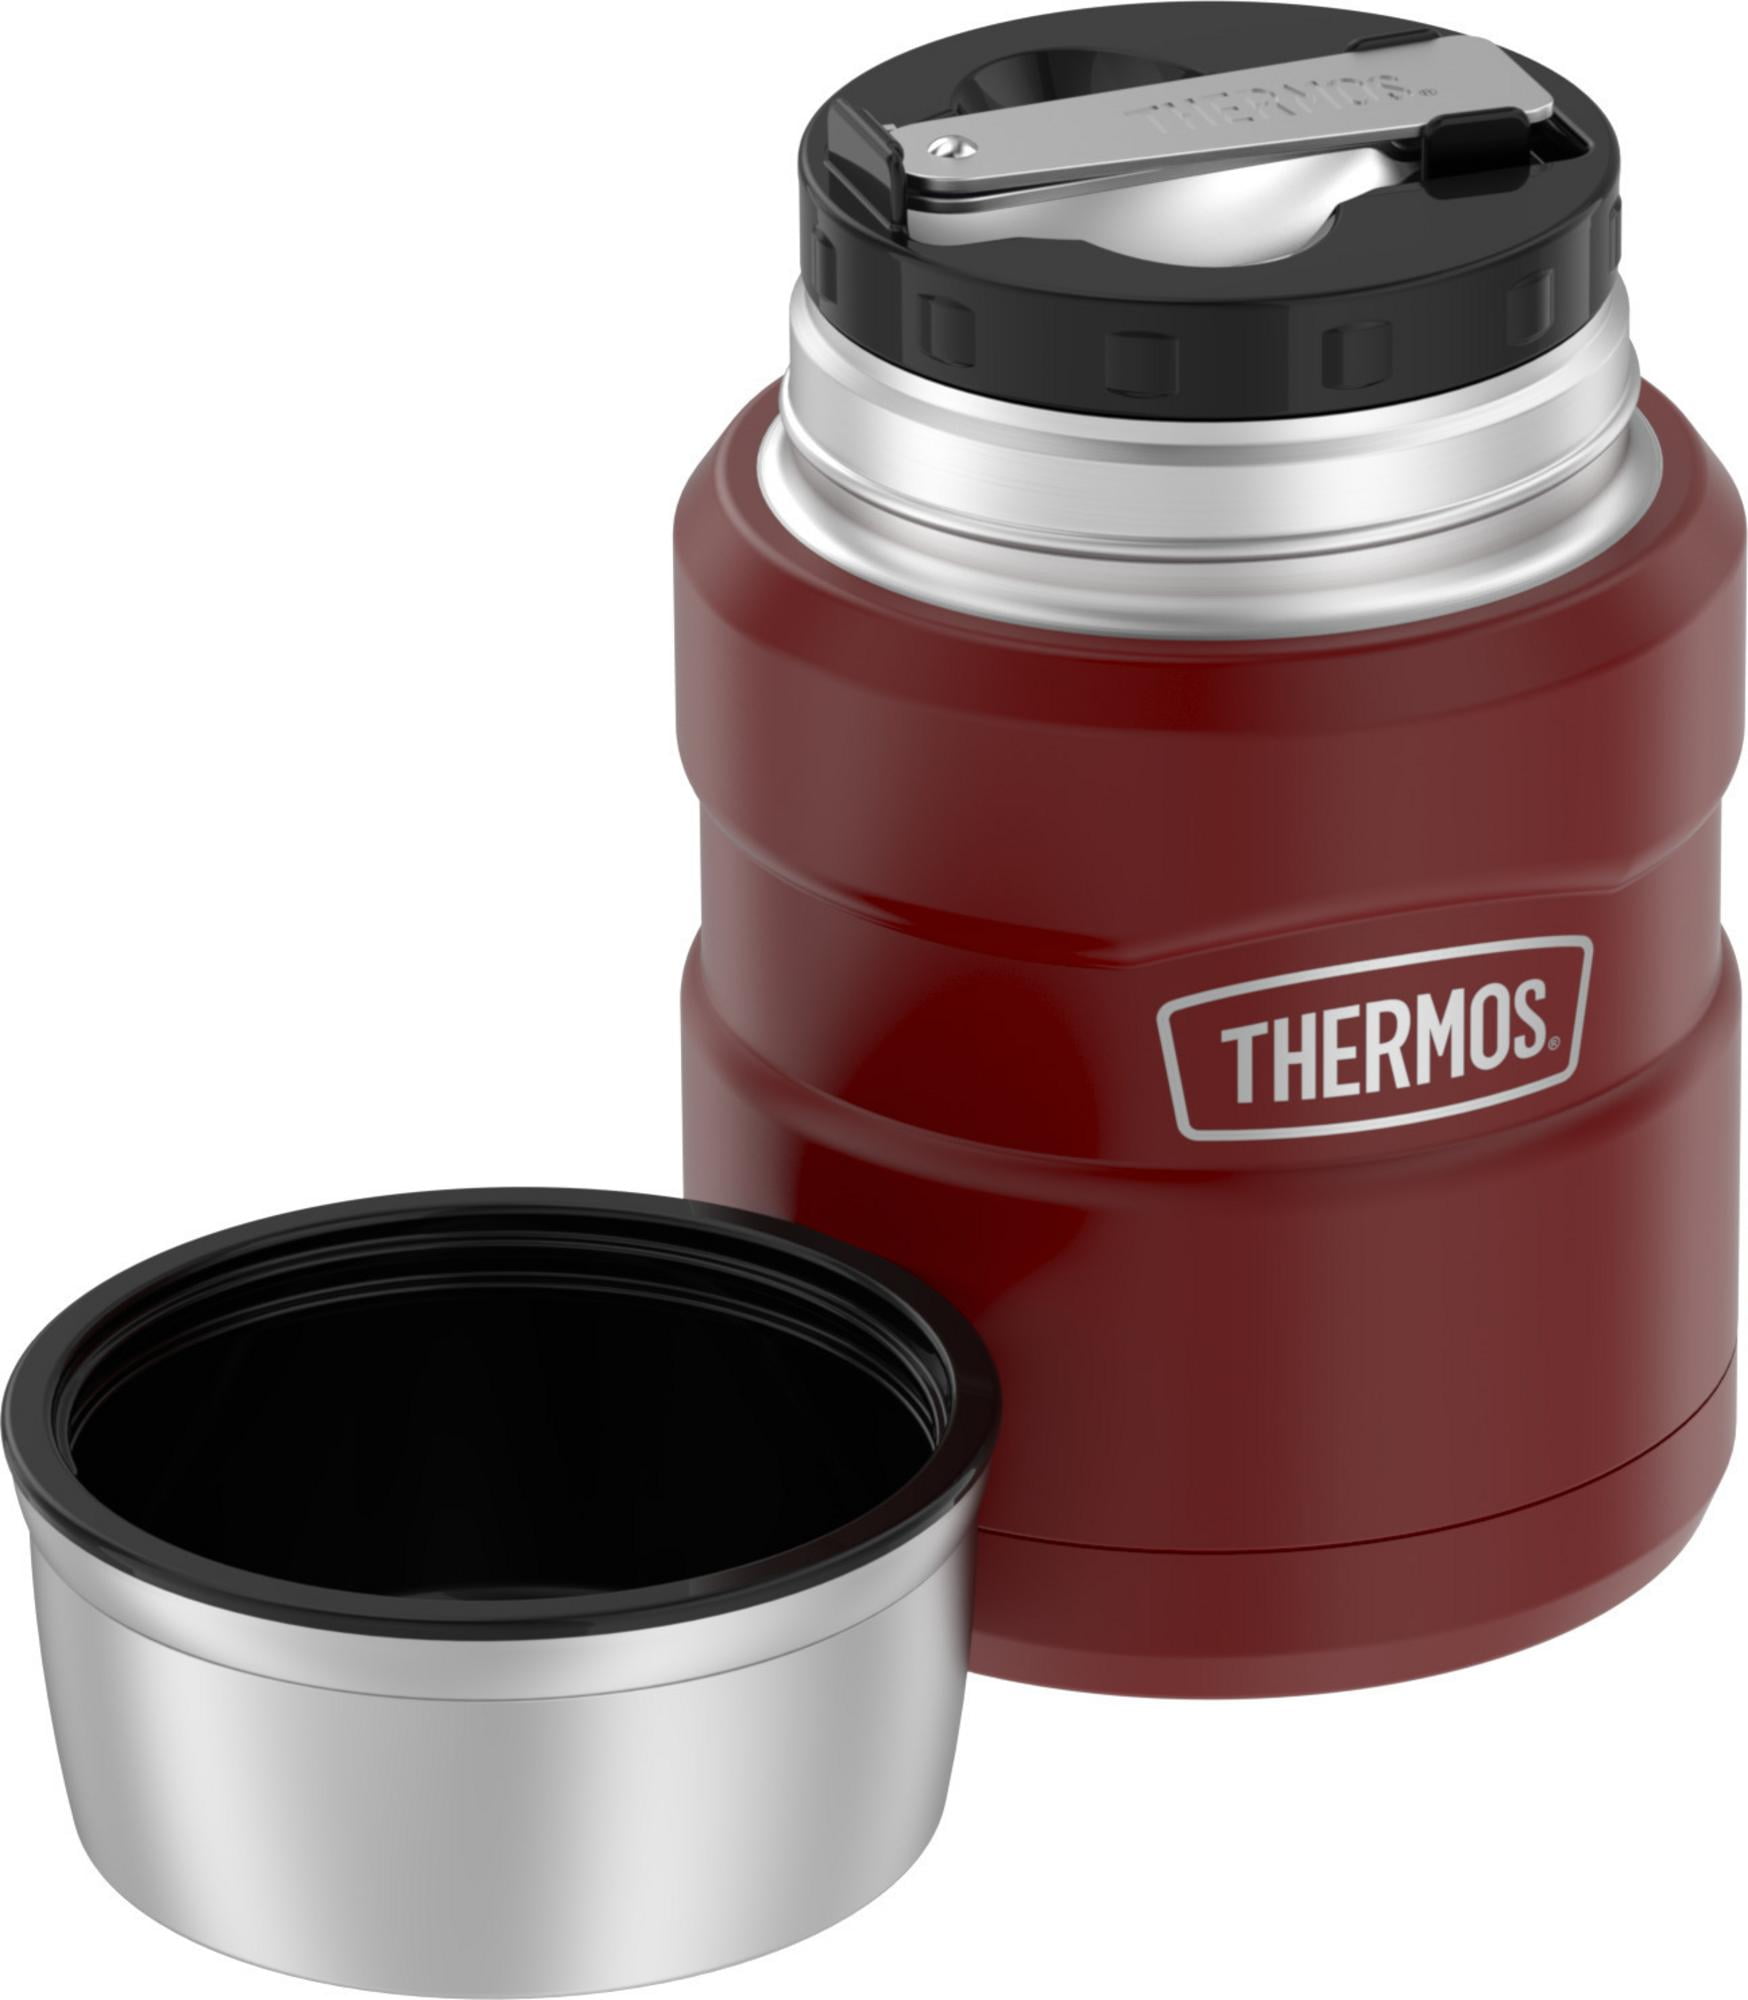 Thermos for Hot Food - Soup Thermos with Folding Spoon - Insulated Food Jar  for 7445045833801